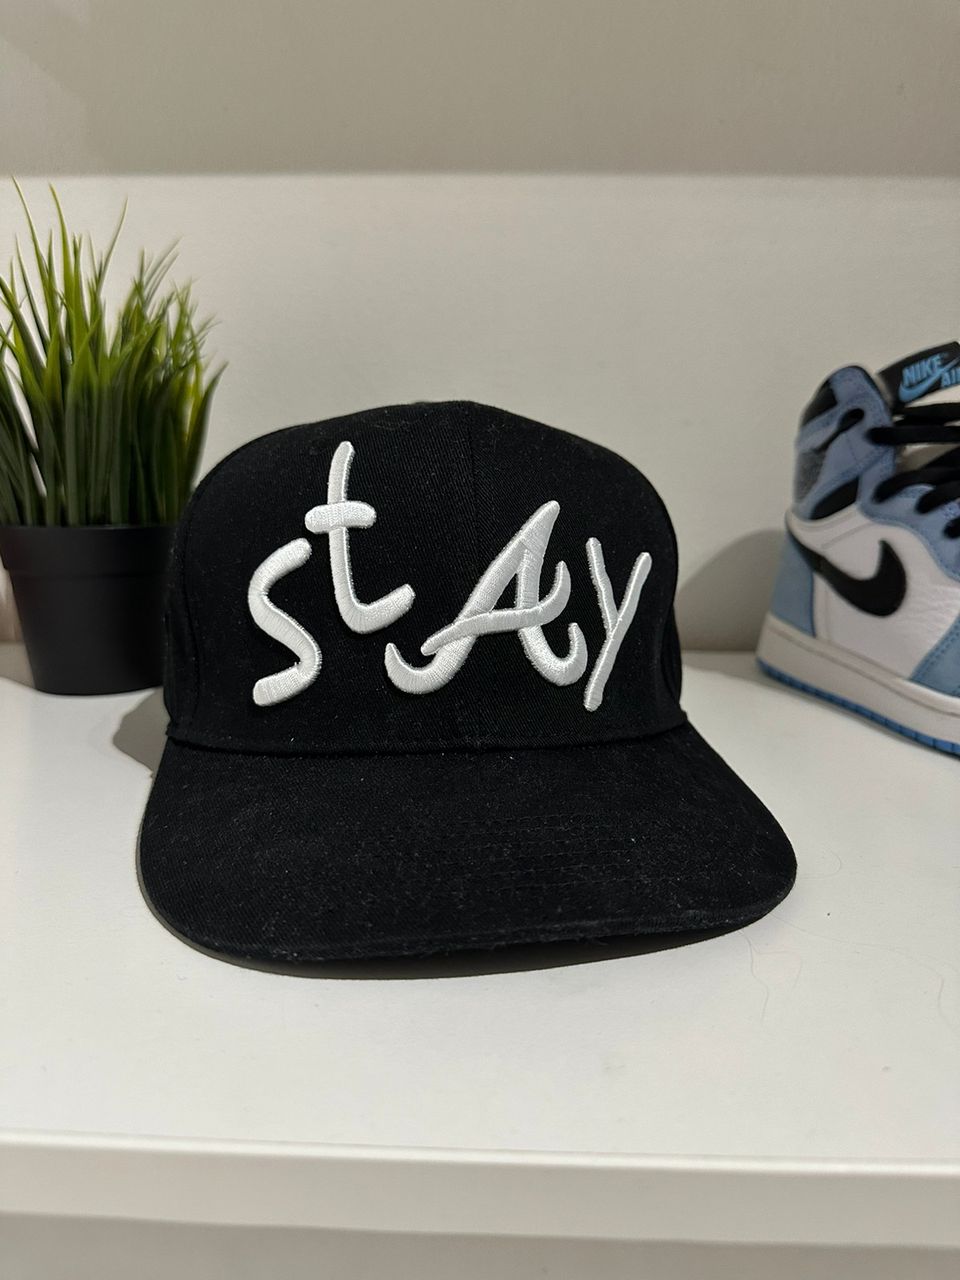 St4y fitted